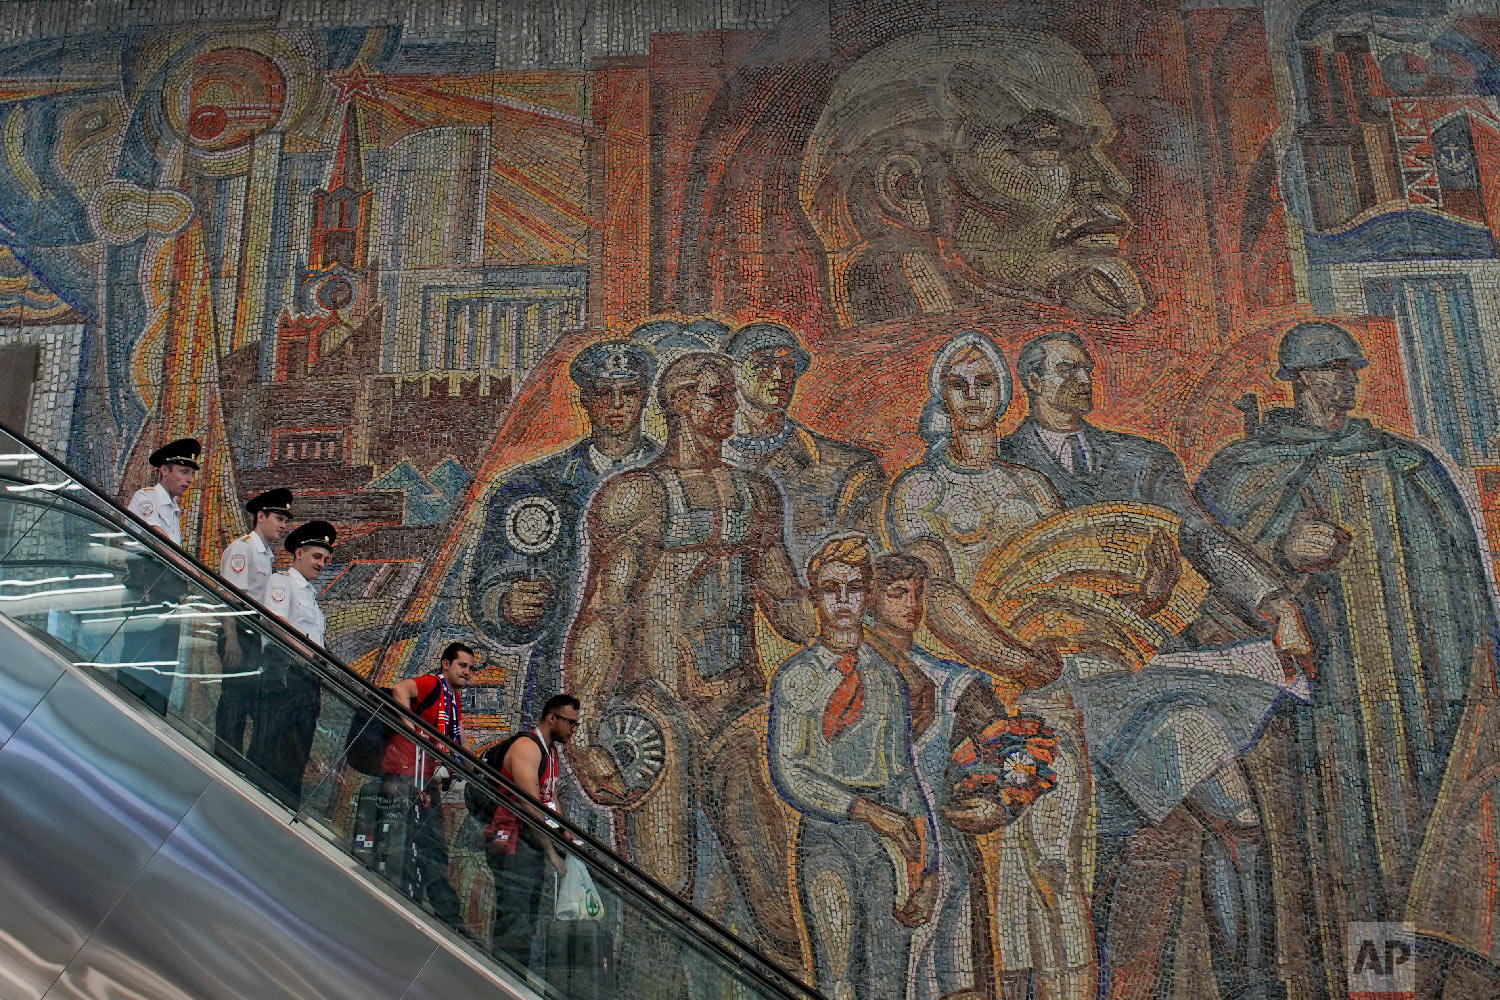  Soccer fans and police ride down an escalator at a subway station in front of a large soviet-era mural depicting Soviet founder Vladimir Lenin, top, during the 2018 soccer World Cup in Nizhny Novgorod, Russia on June 25, 2018. (AP Photo/Victor R. Ca